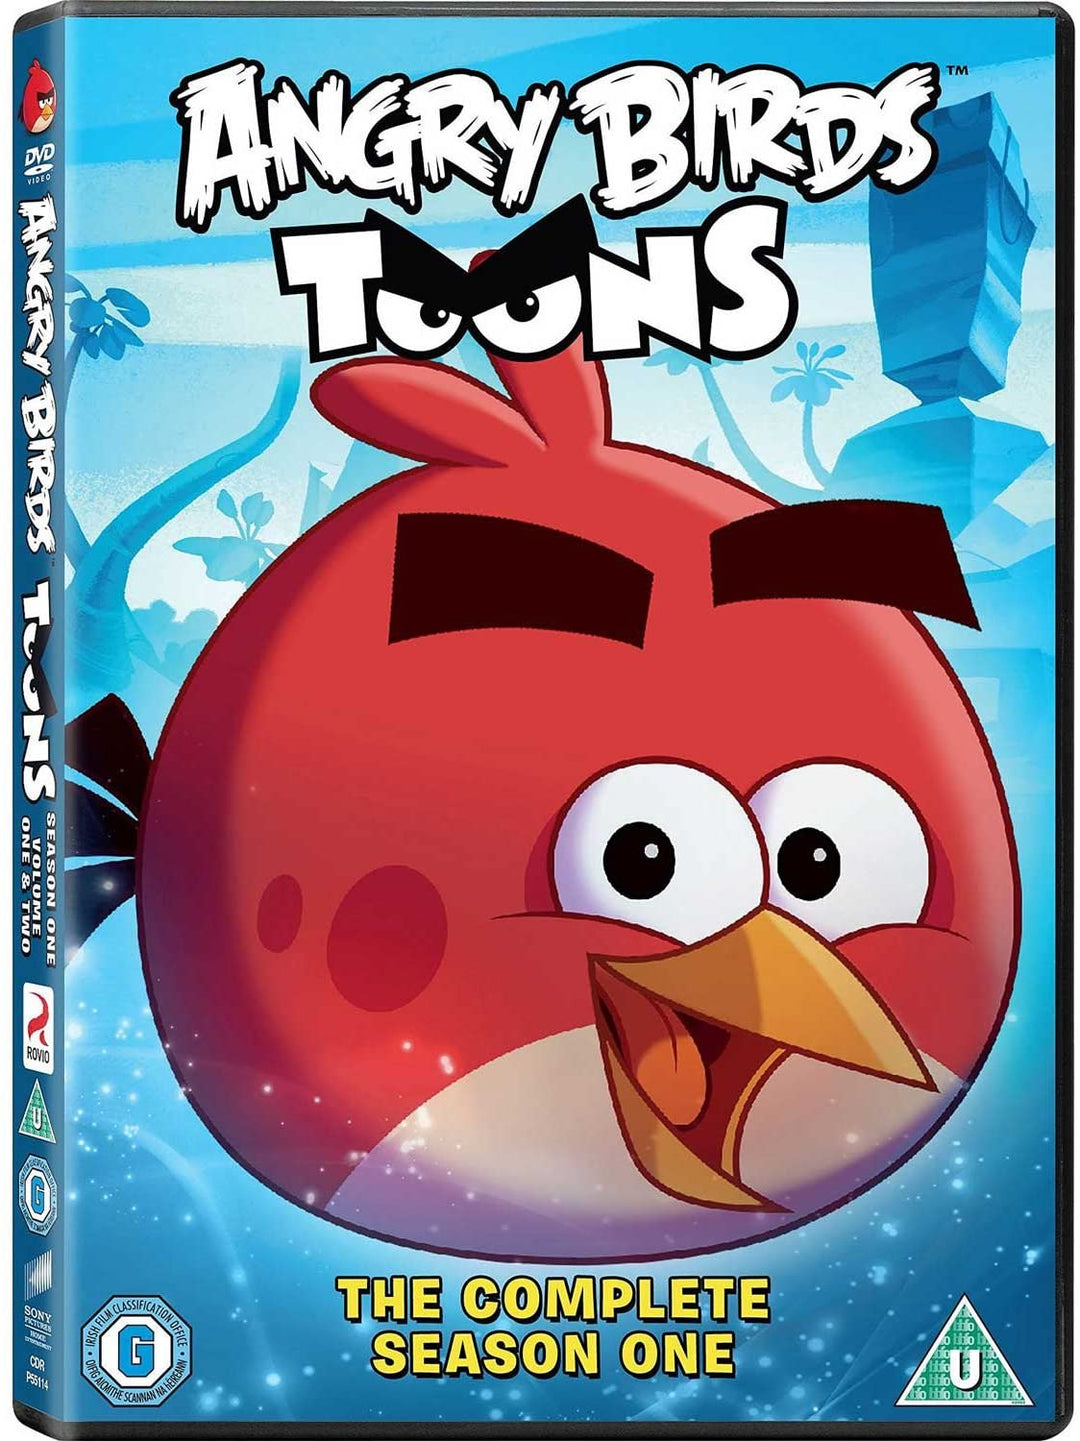 Angry Birds Toons: The Complete Season 1